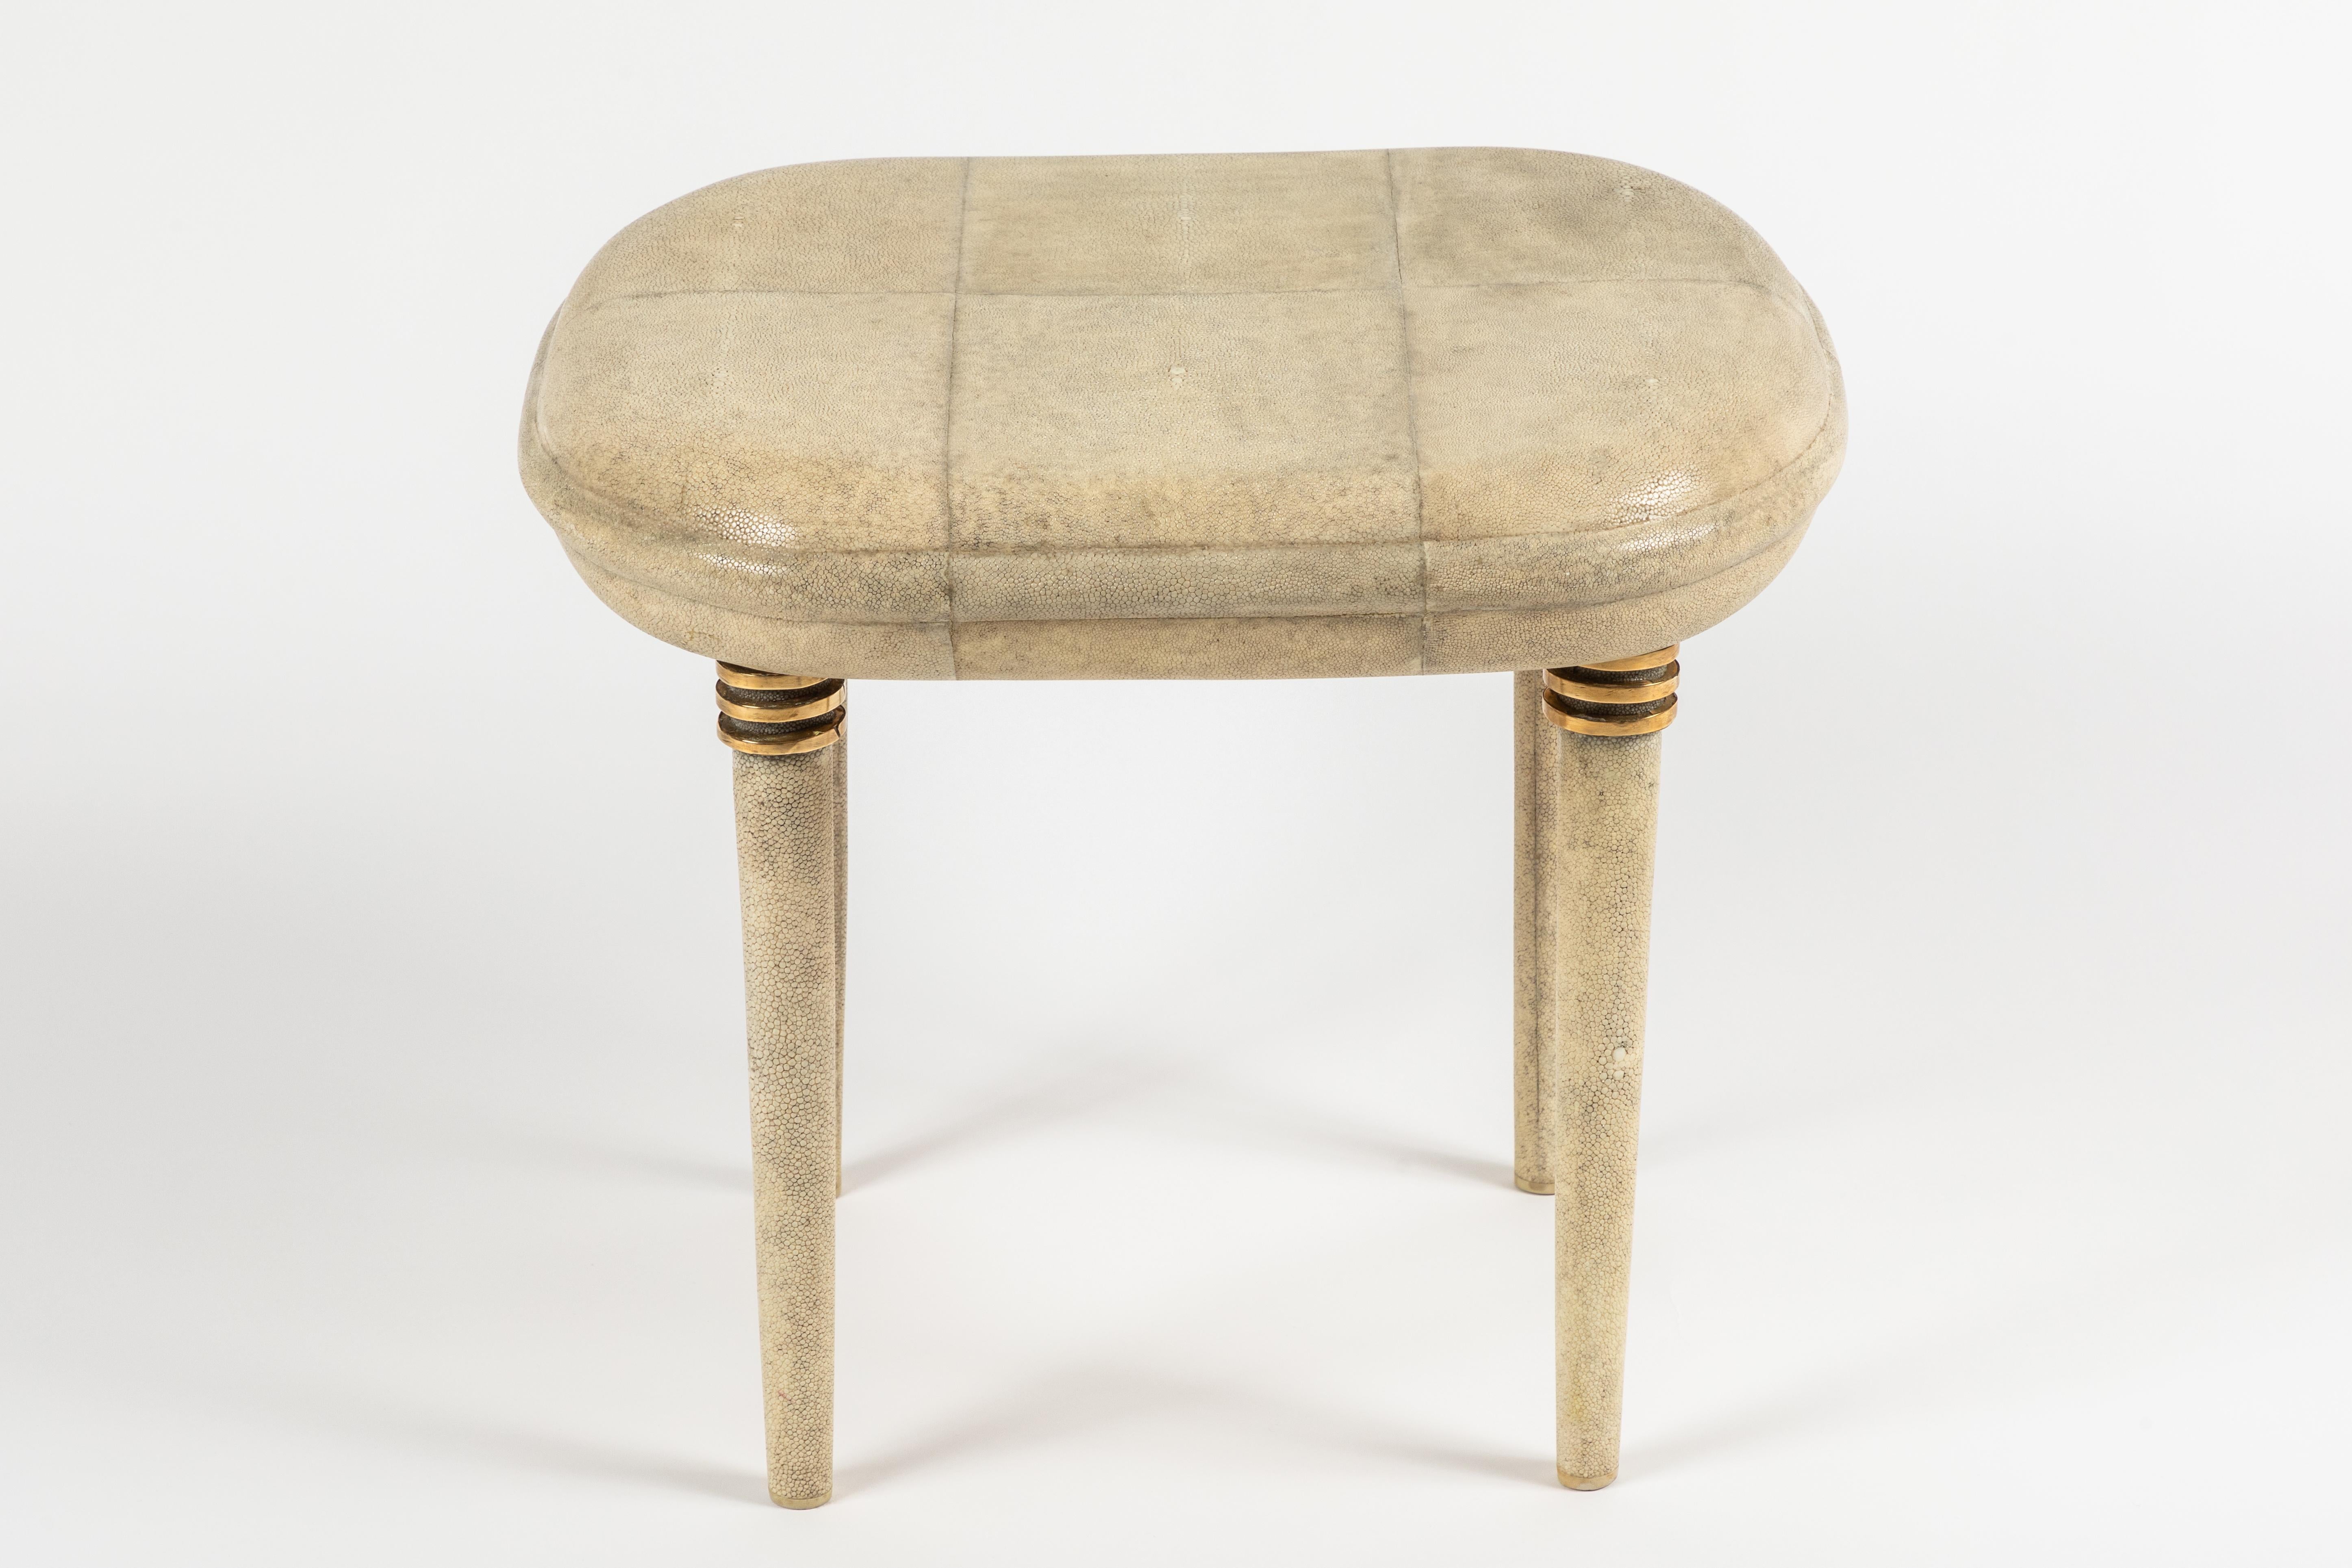 Polished Shagreen Dressing Table and Stool by R&Y Augousti, Paris